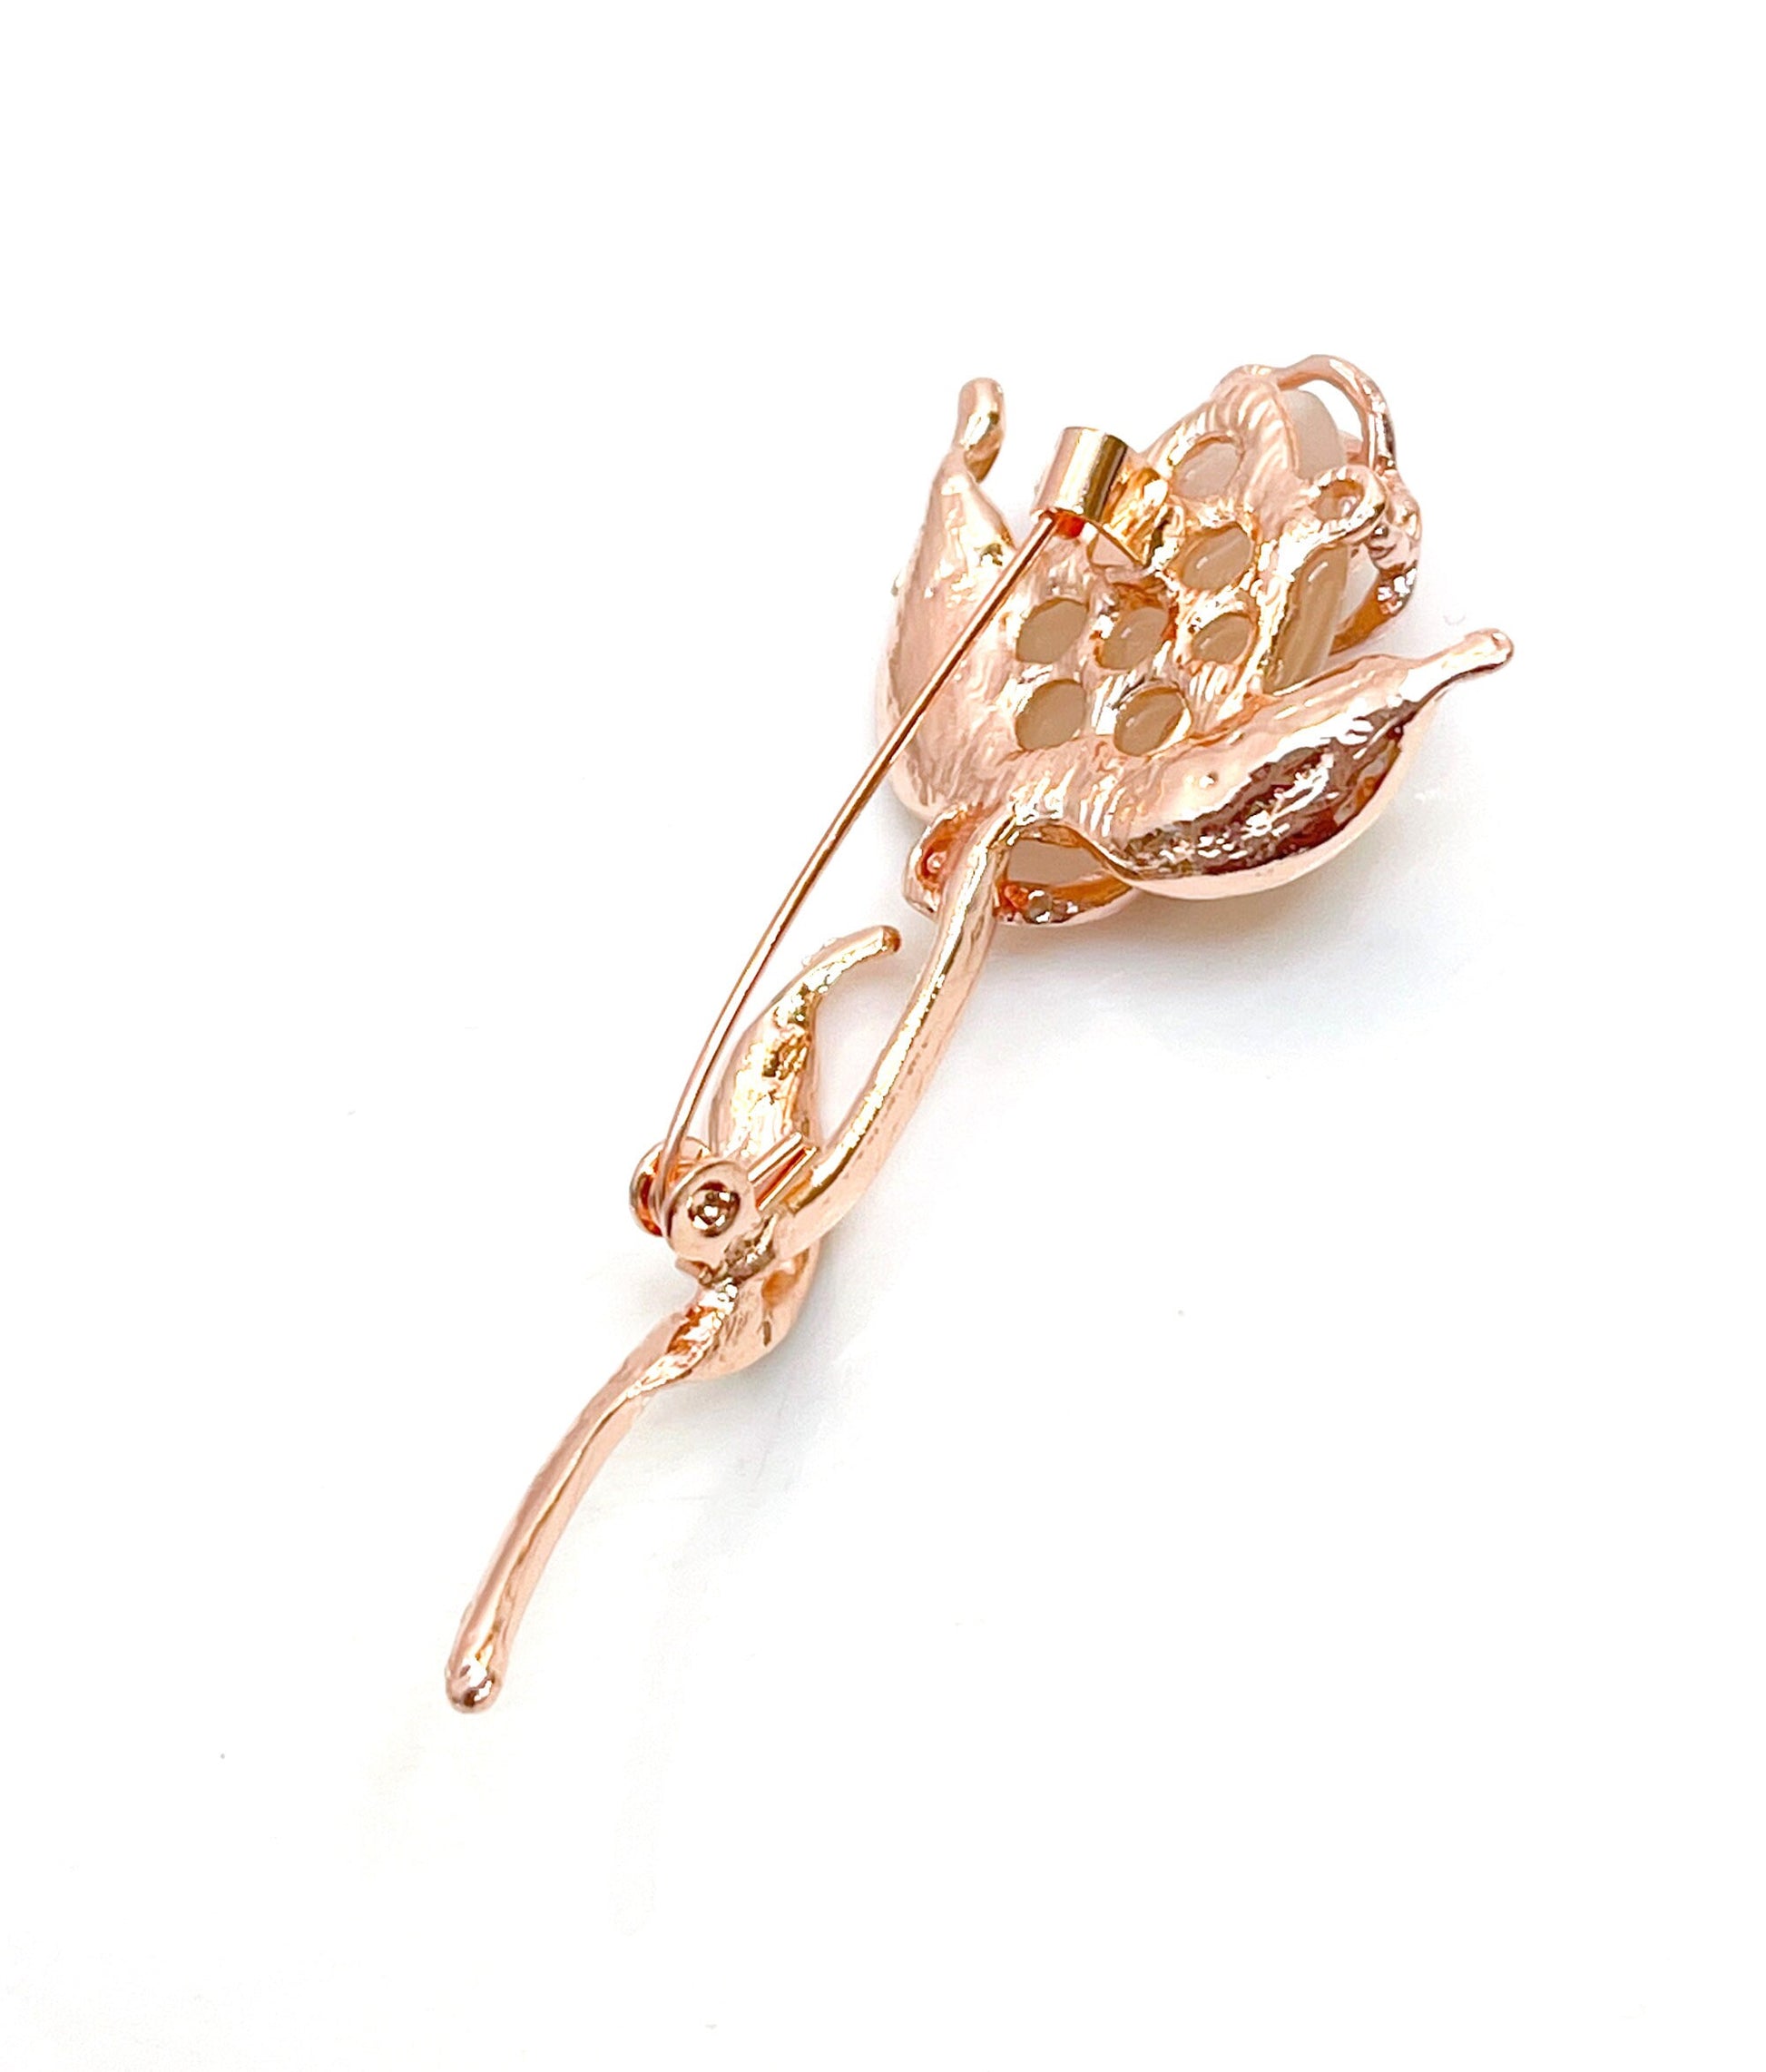 Pretty Single Opal Tulip Brooch, Cream Tulip with Crystals, Flower Jacket Pin, Brooches For Women